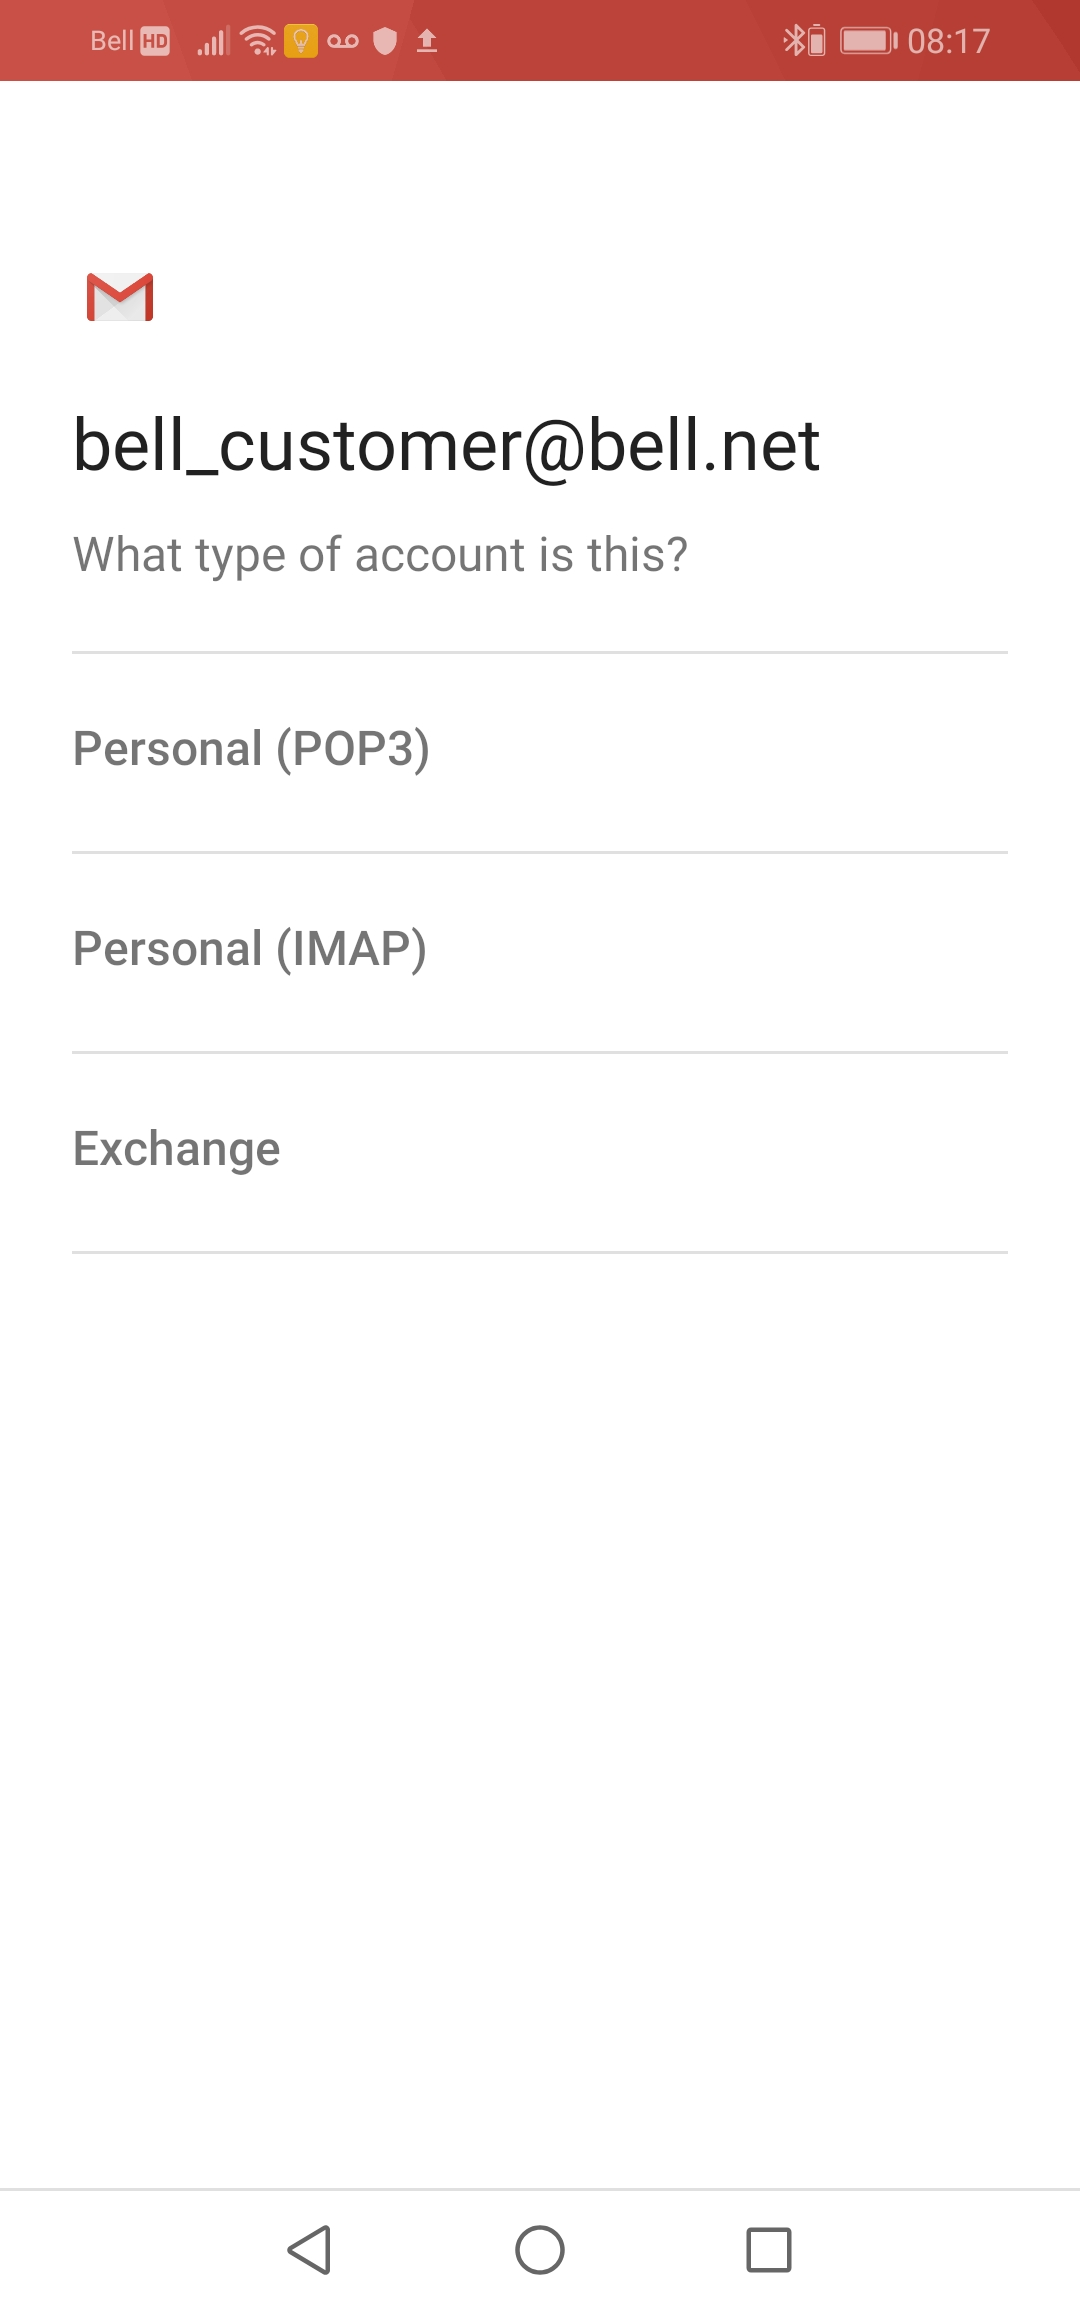 Touch Personal (IMAP).